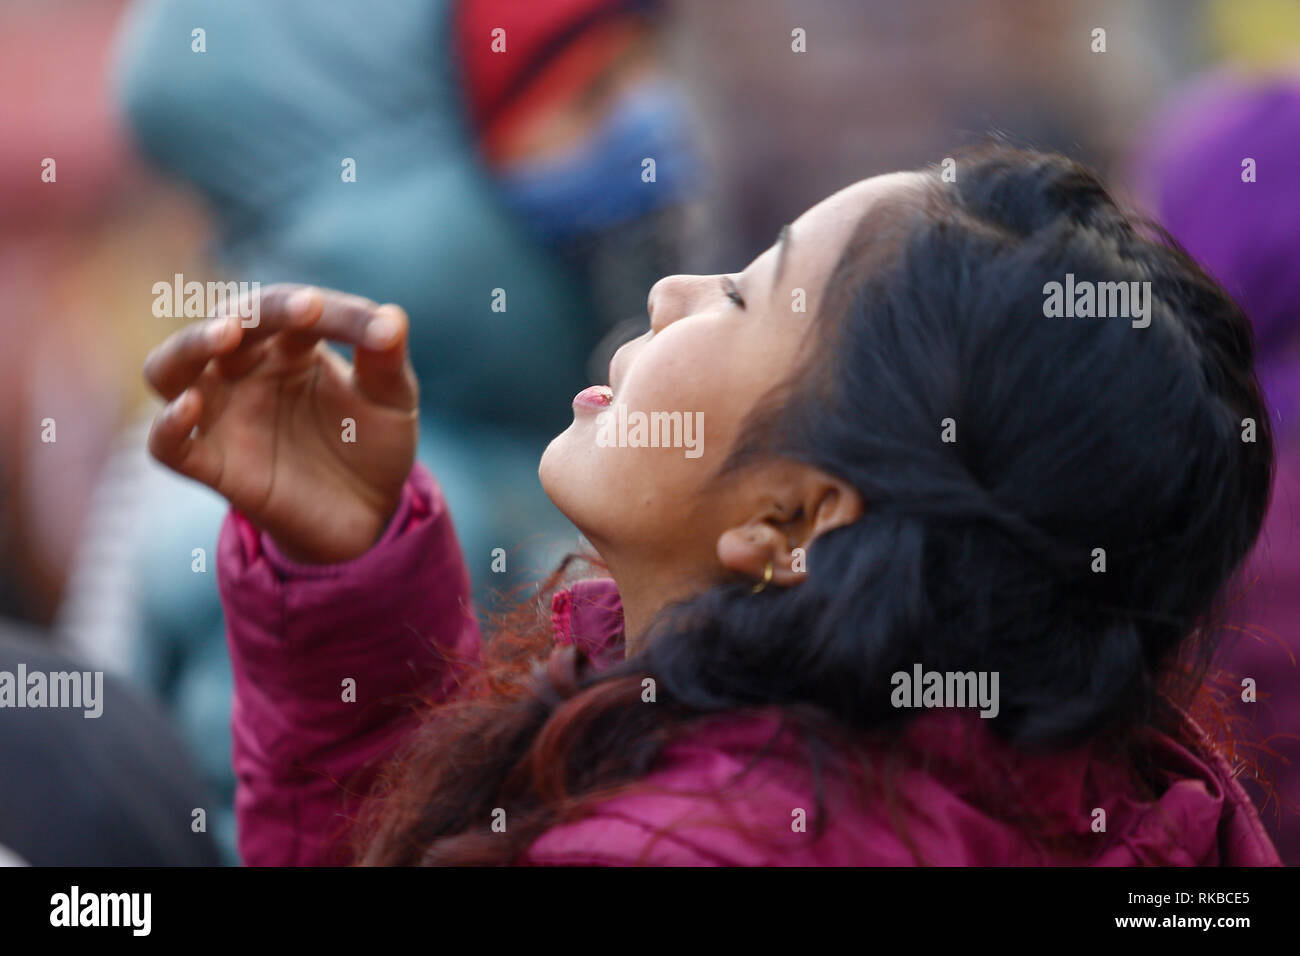 A girl seen worshiping Goddess of education Saraswati at the temple during the festival. Shreepanchami festival is dedicated to goddess of education Saraswati, devotees specially students worship and pray for knowledge and education. Shreepanchami also called Basanta Panchami marks the arrival of spring session in Nepal. Stock Photo